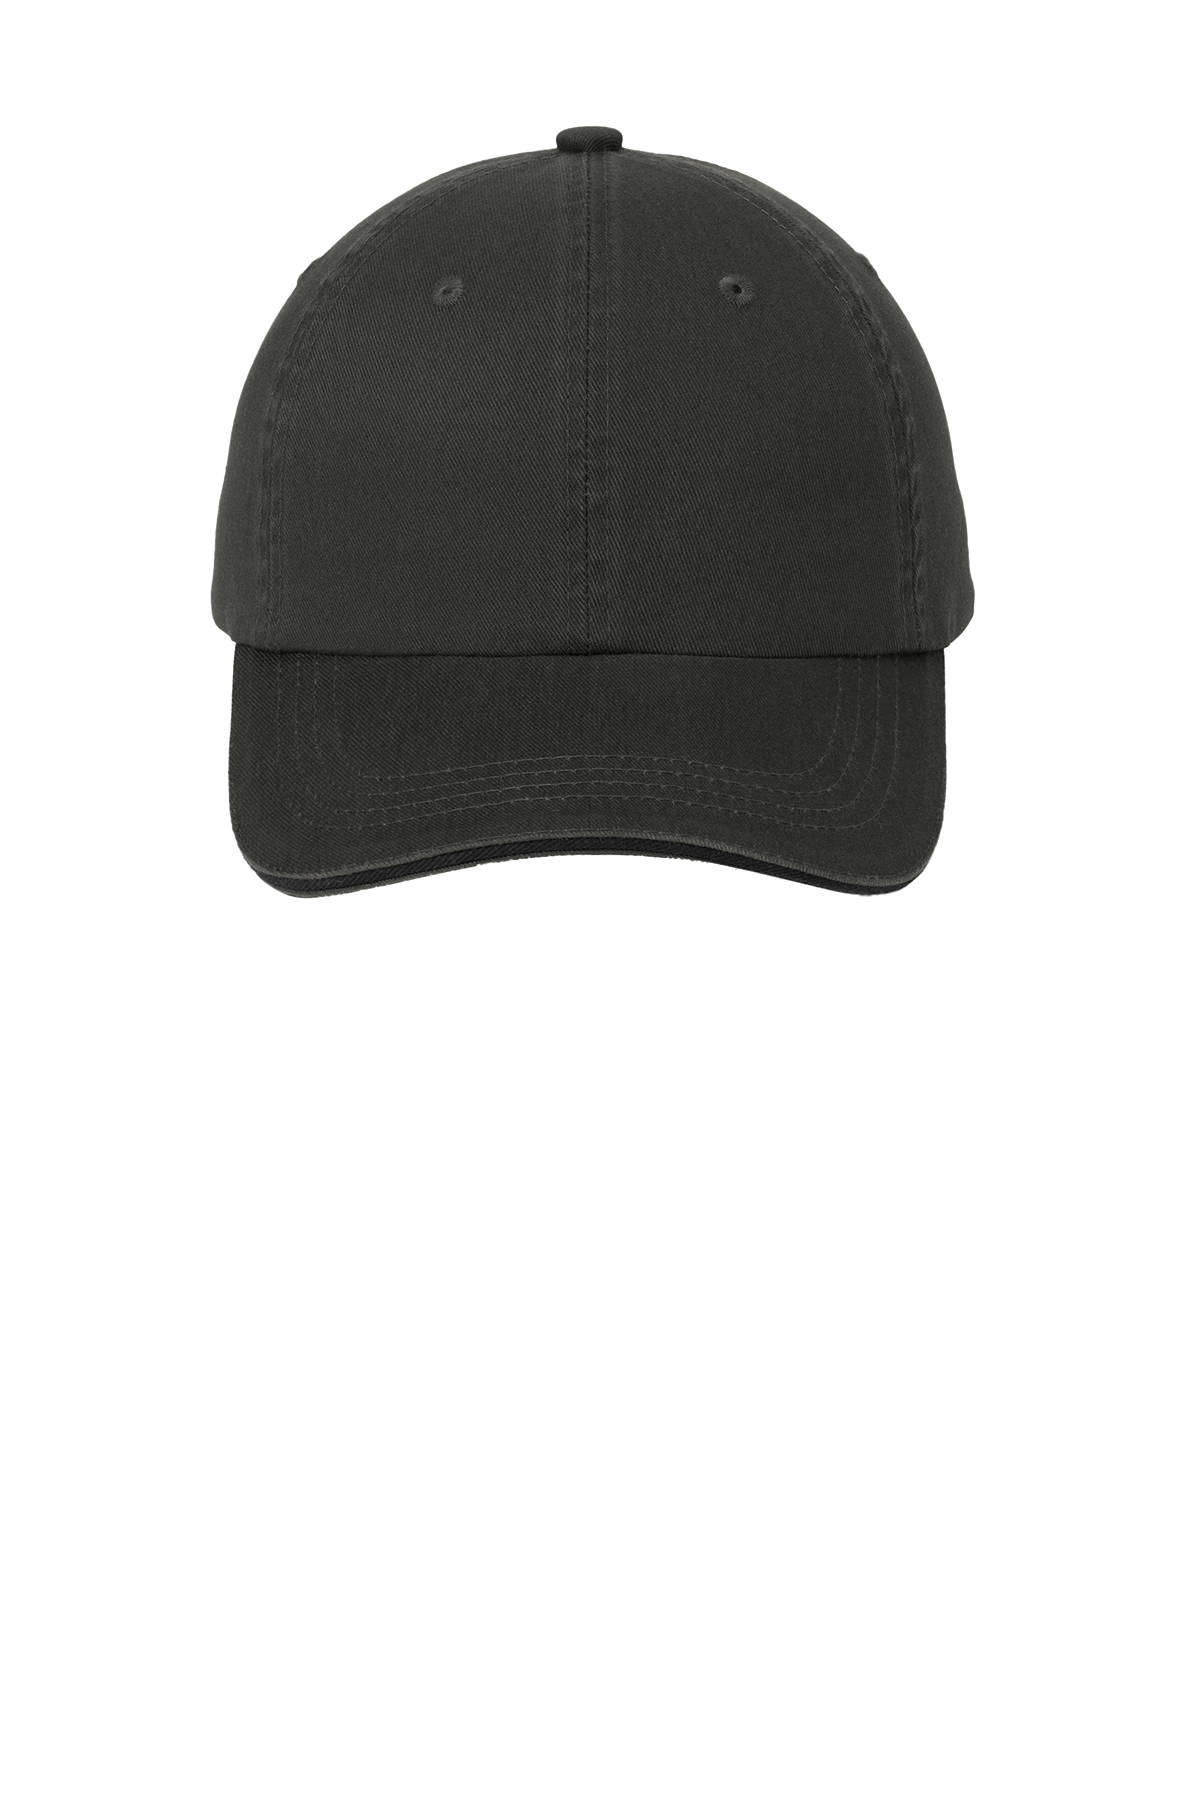 Port Authority Sandwich Bill Cap with Striped Closure | Product | Port ...